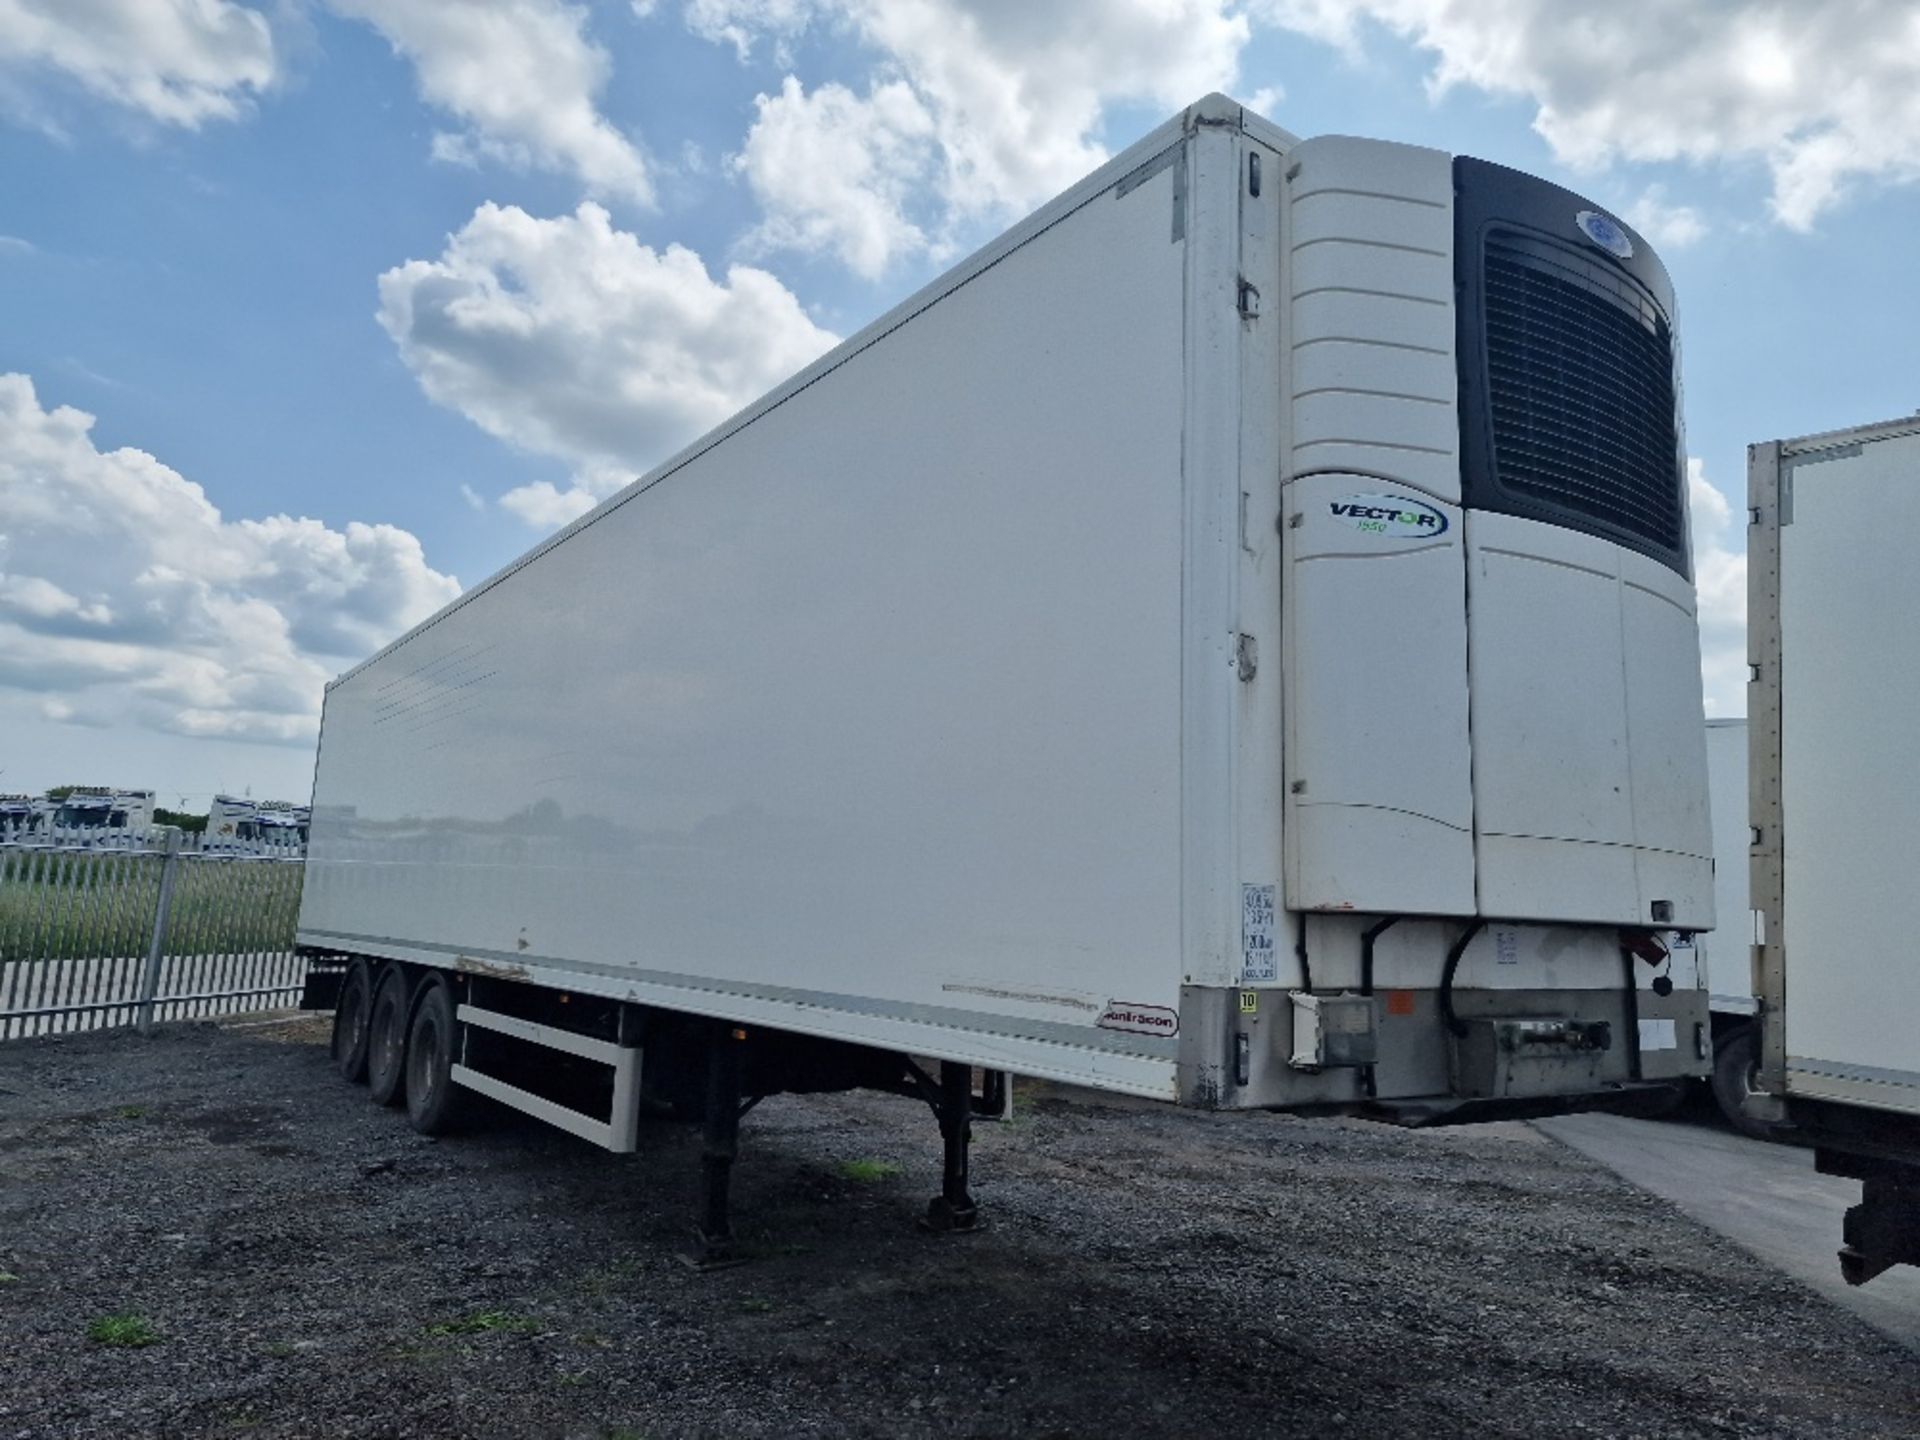 2014 Montracon 13.6m Tri-Axle Refrigerated Trailer - Image 10 of 13